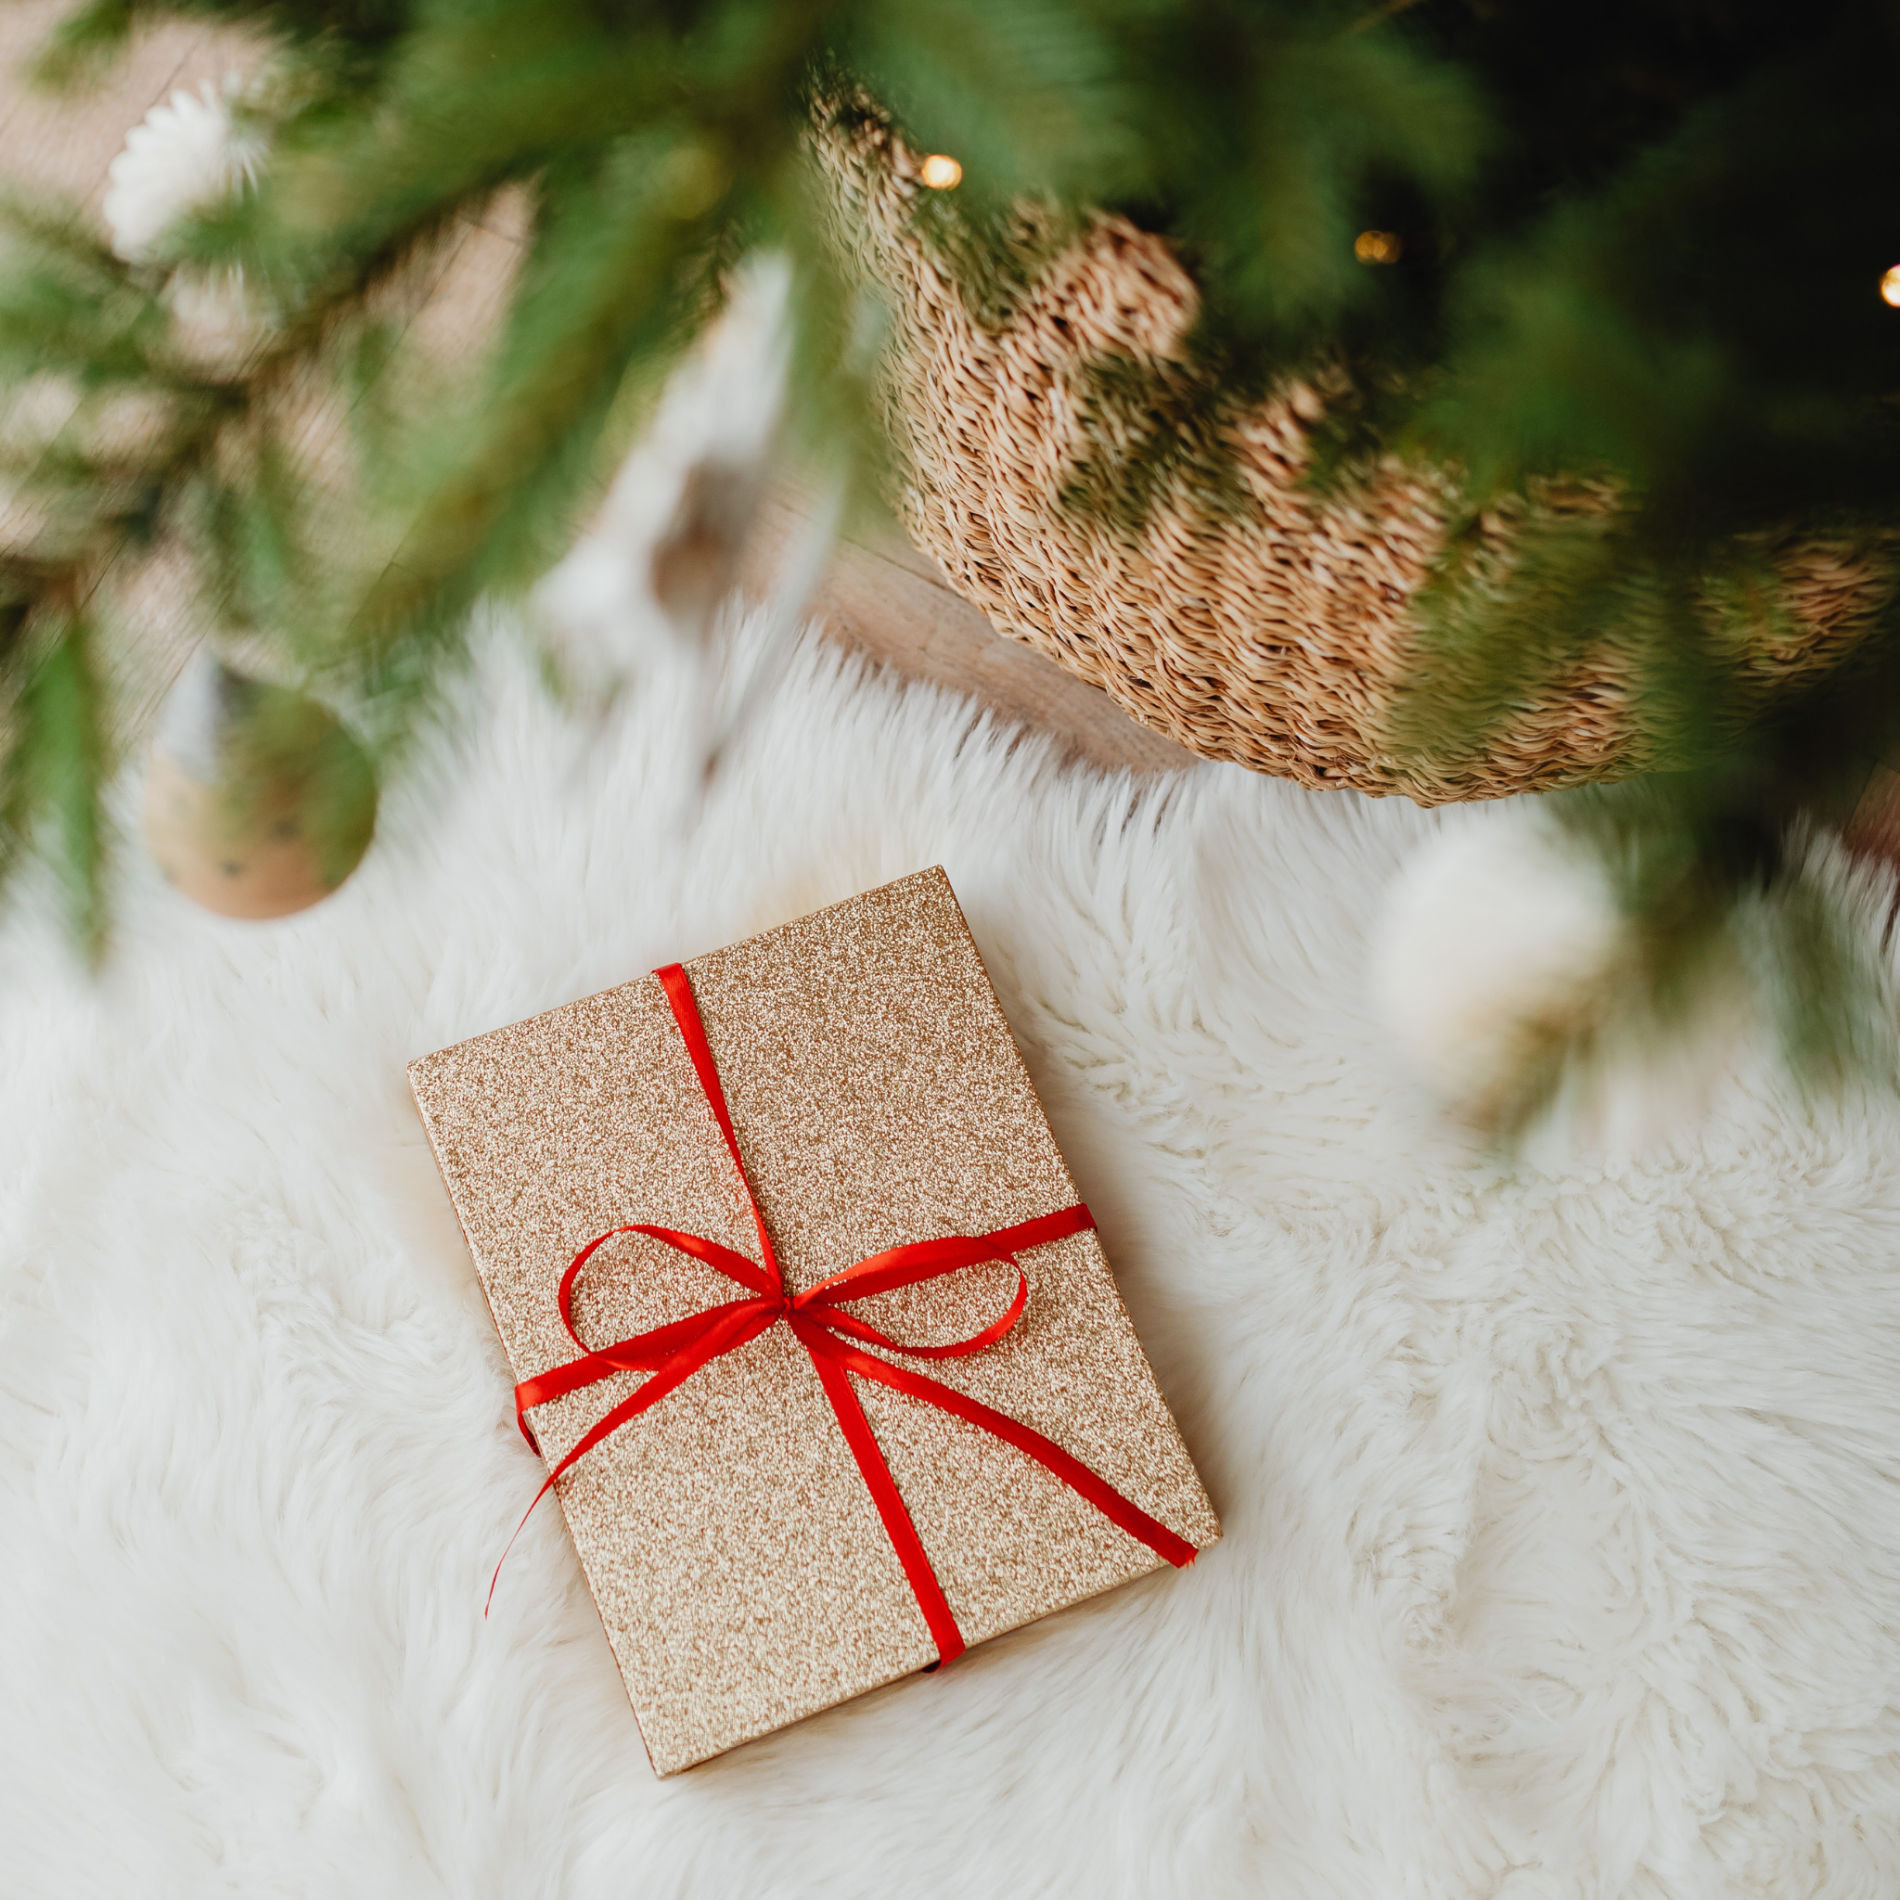 2022 Holiday Christmas Gift Guide - Gift Inspiration and Ideas for everyone on your list - Fashion Icon - Beauty Queen - Wellness Lover - Homebody - Future CEO - Inspire to Glow Blog Header